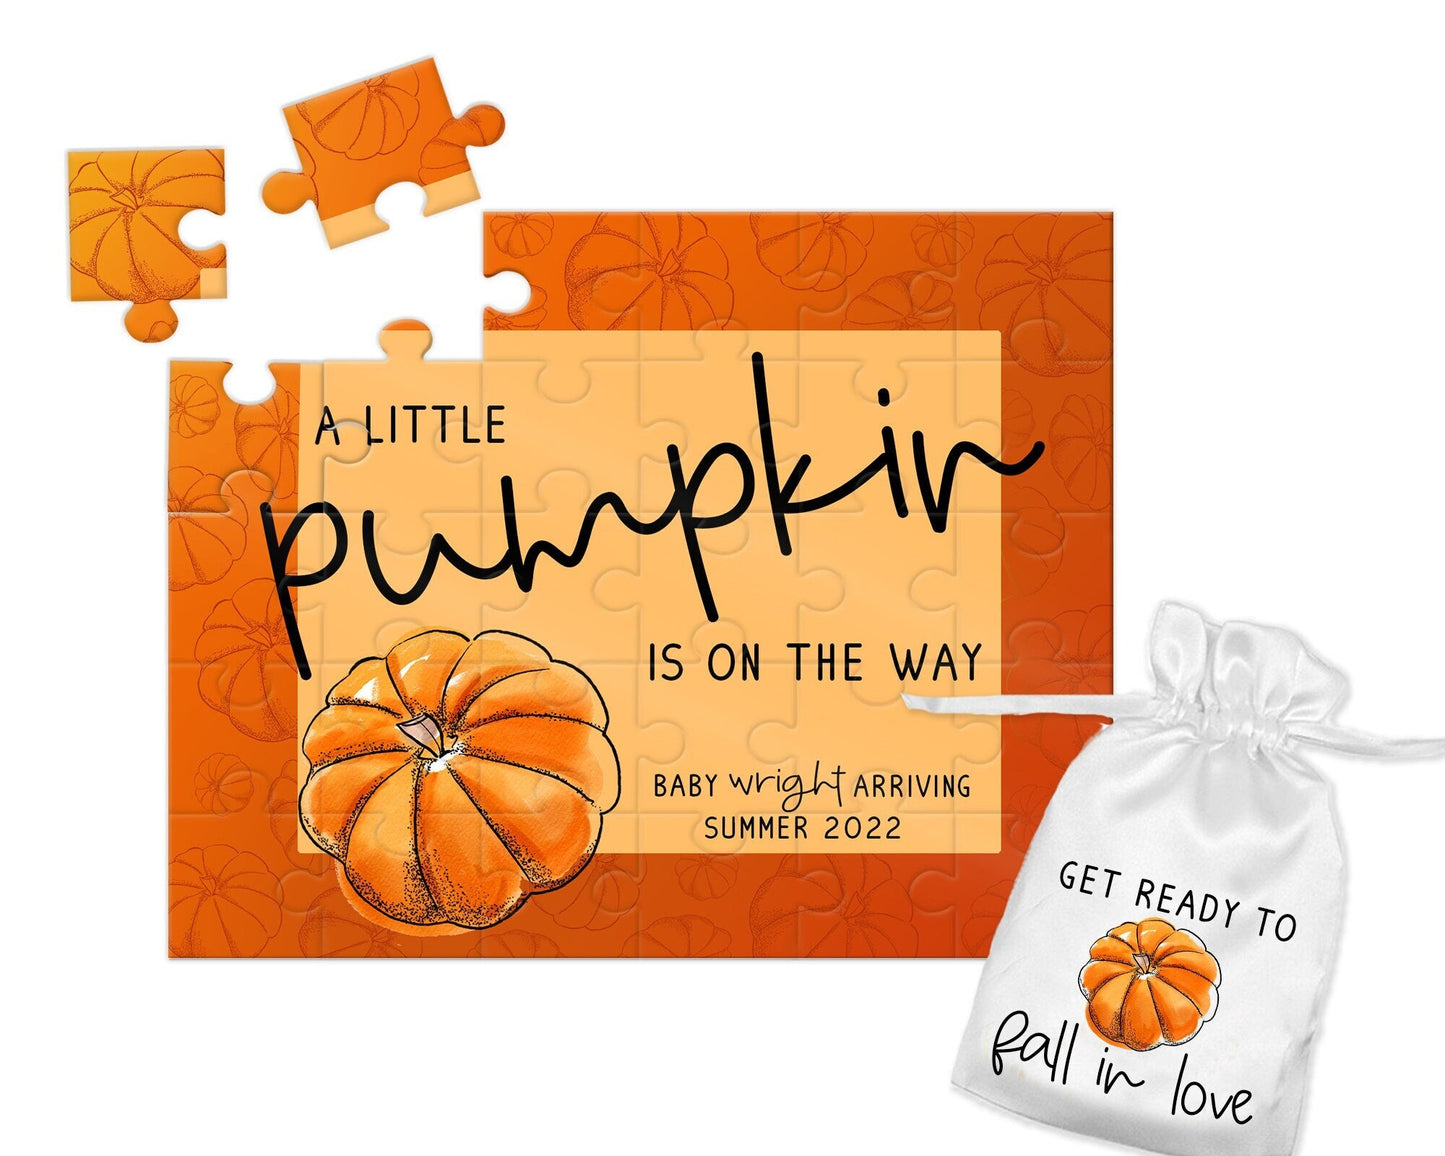 Baby Pumpkin Announcement Puzzle Pregnancy Announcement Personalized We're Expecting Gift Baby Coming Soon - Squishy Cheeks